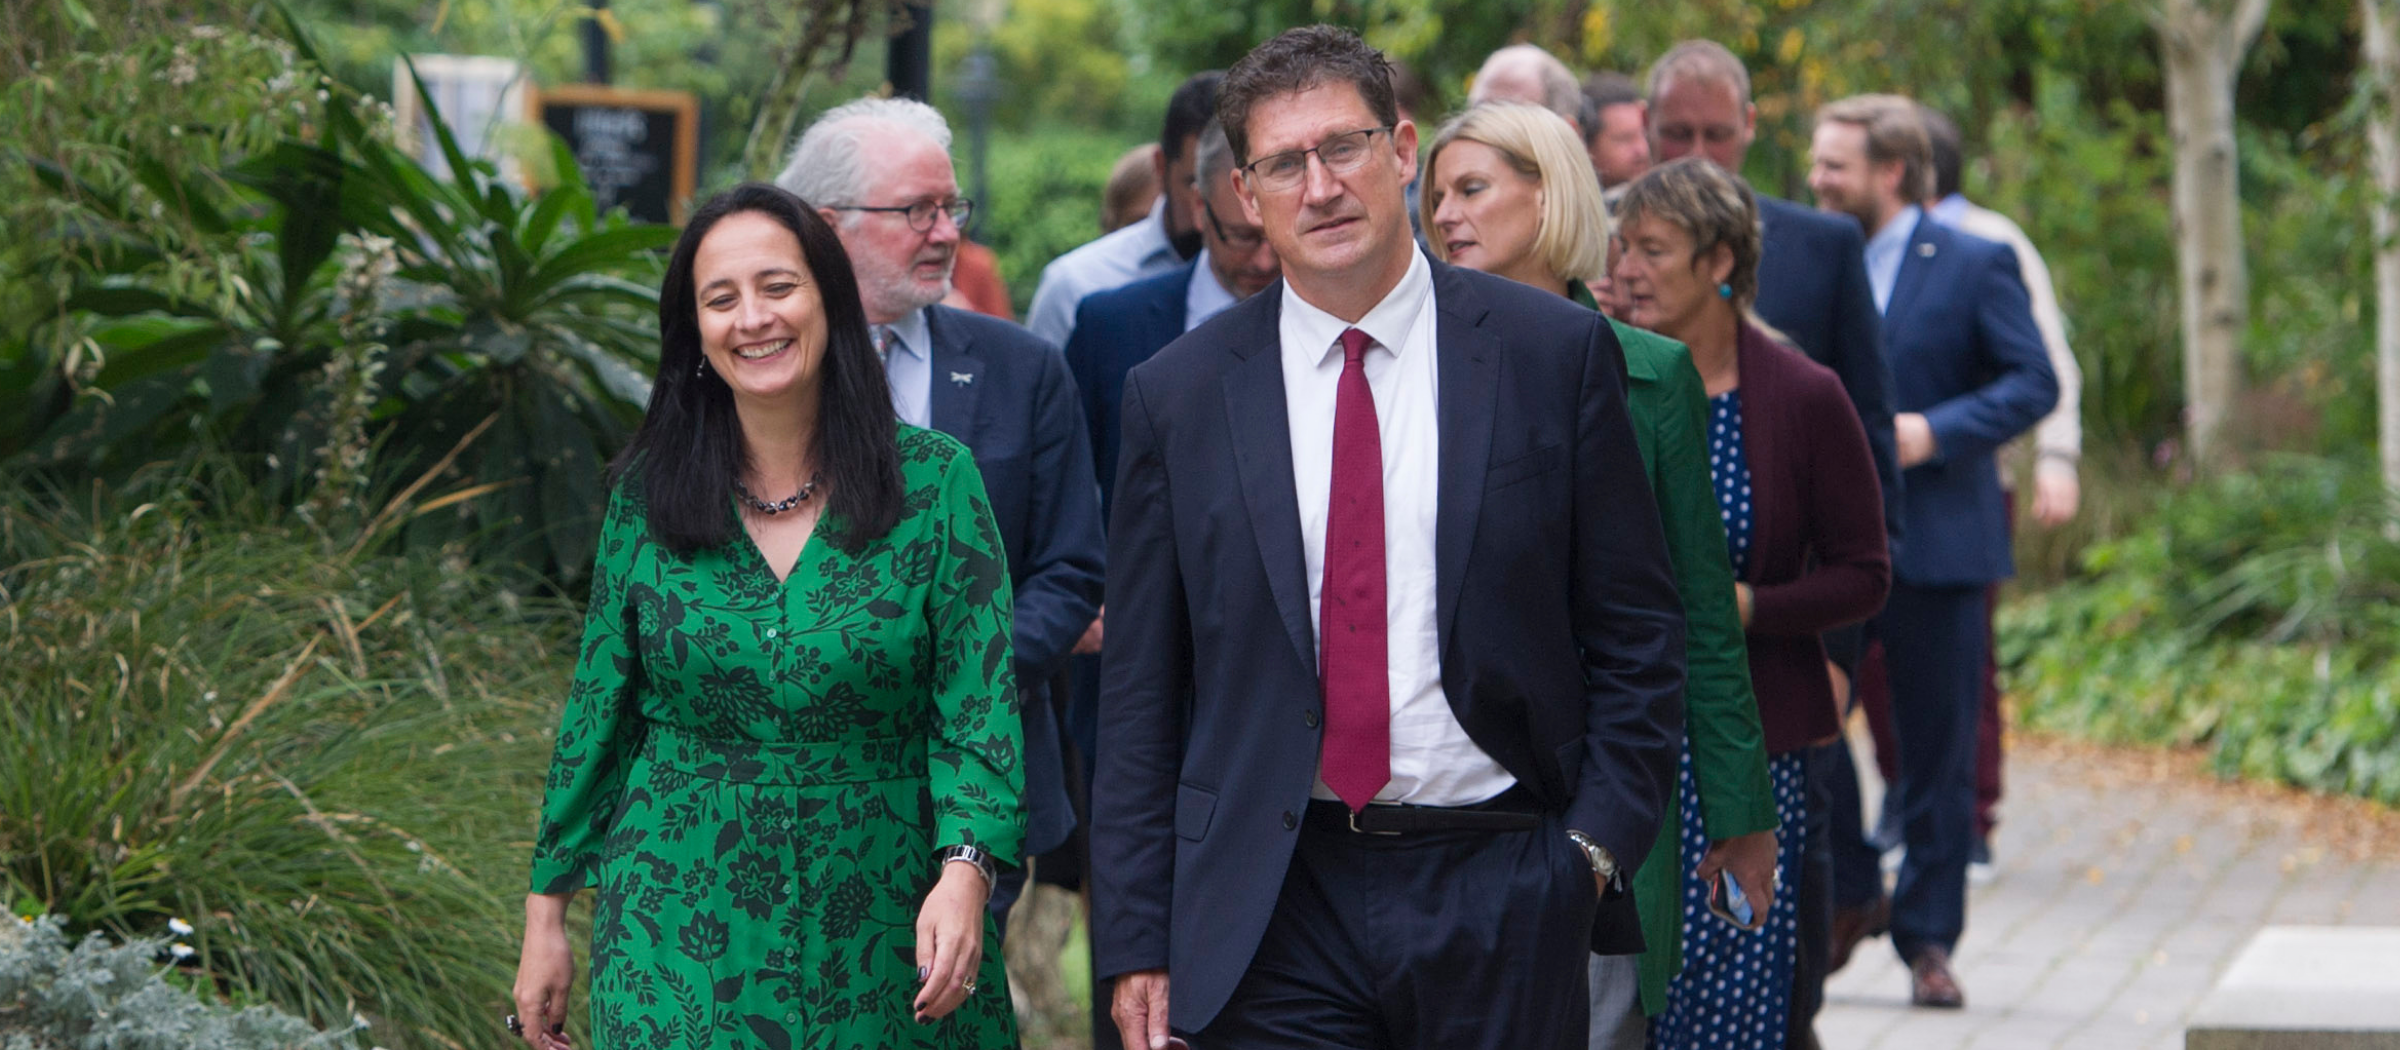 A photo of a group of people walking in twos along a path in a park. At the front is Catherine Martin and Eamon Ryan.